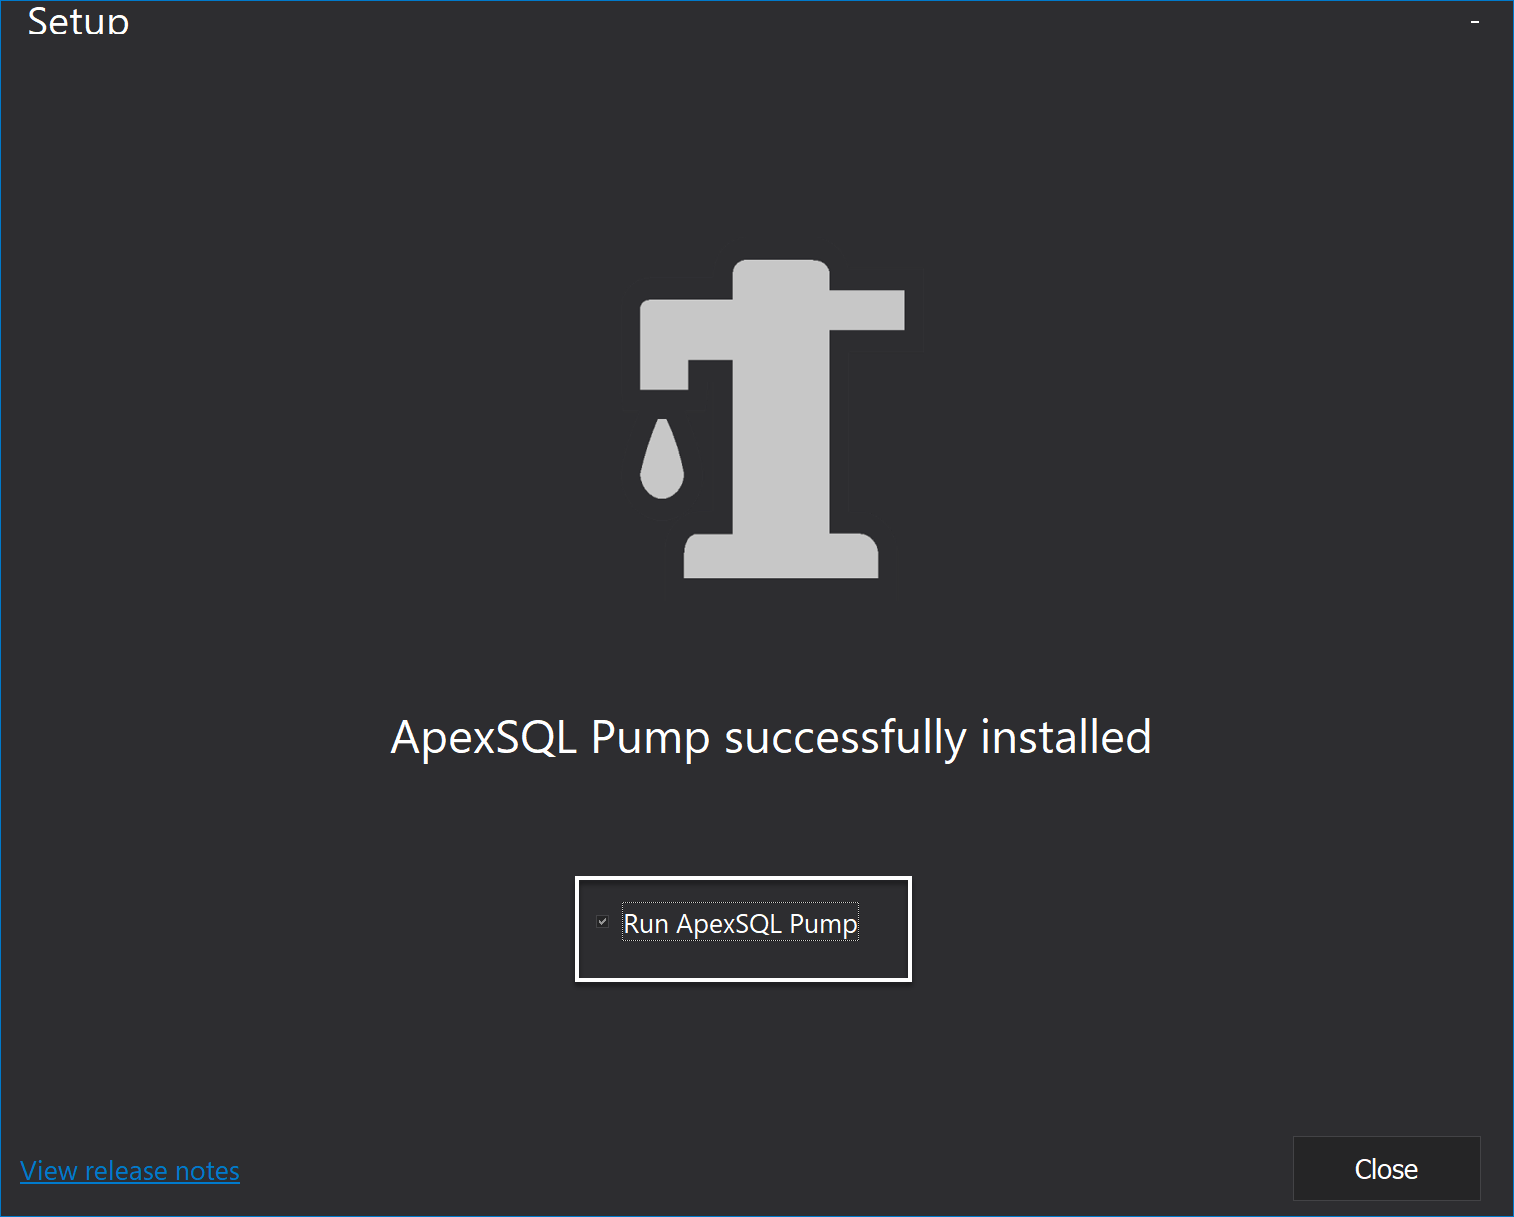 Finished installation of ApexSQL Pump